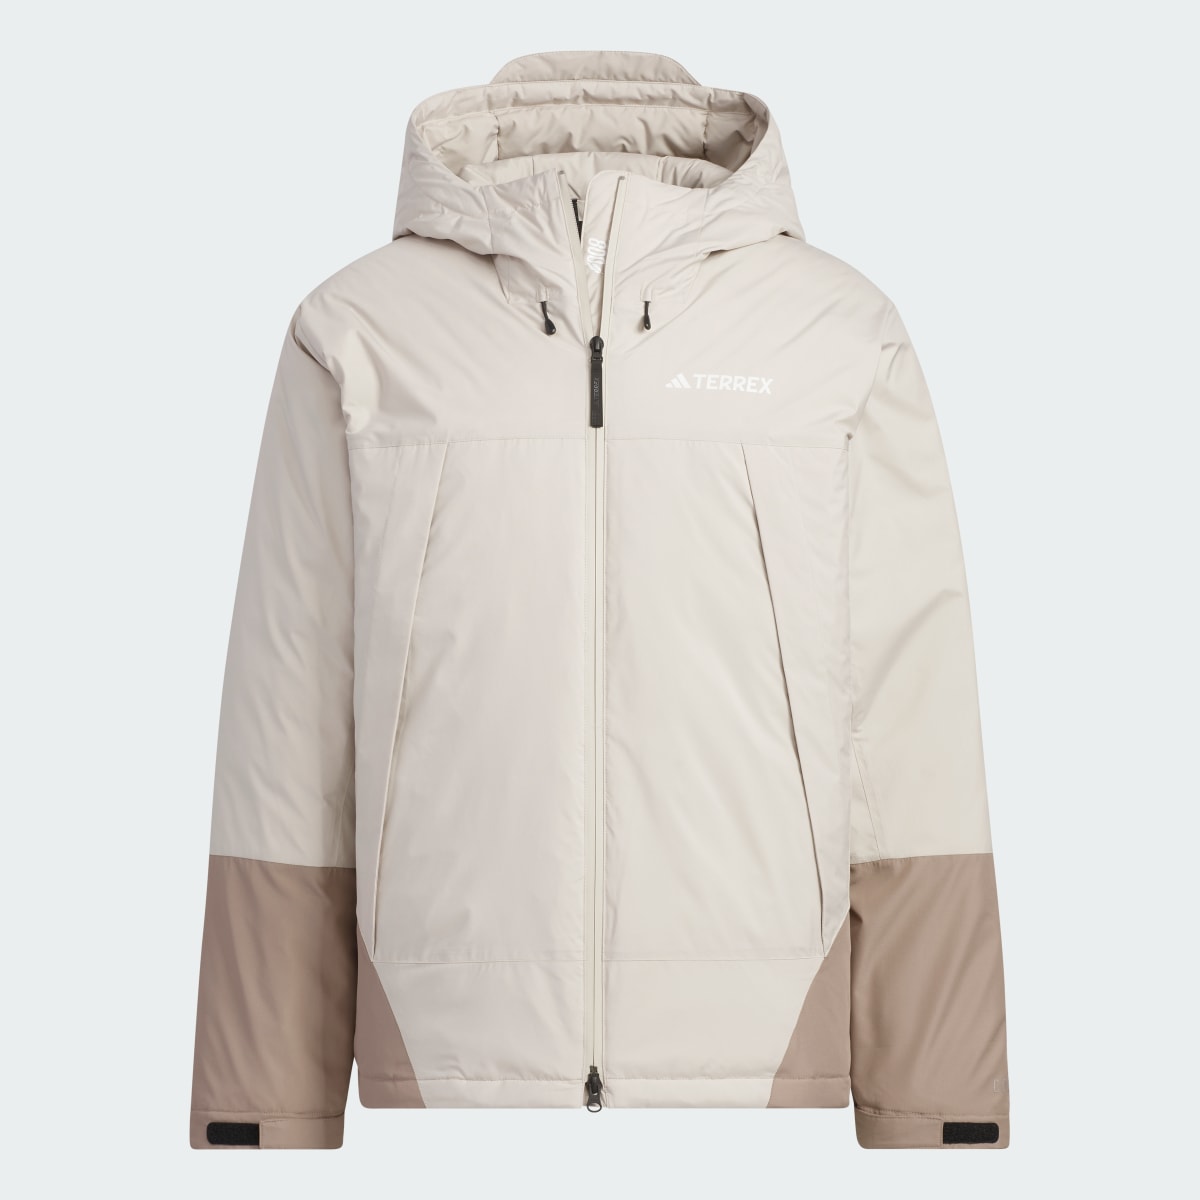 Adidas COLD.RDY Midweight Goose Down Jacket. 5